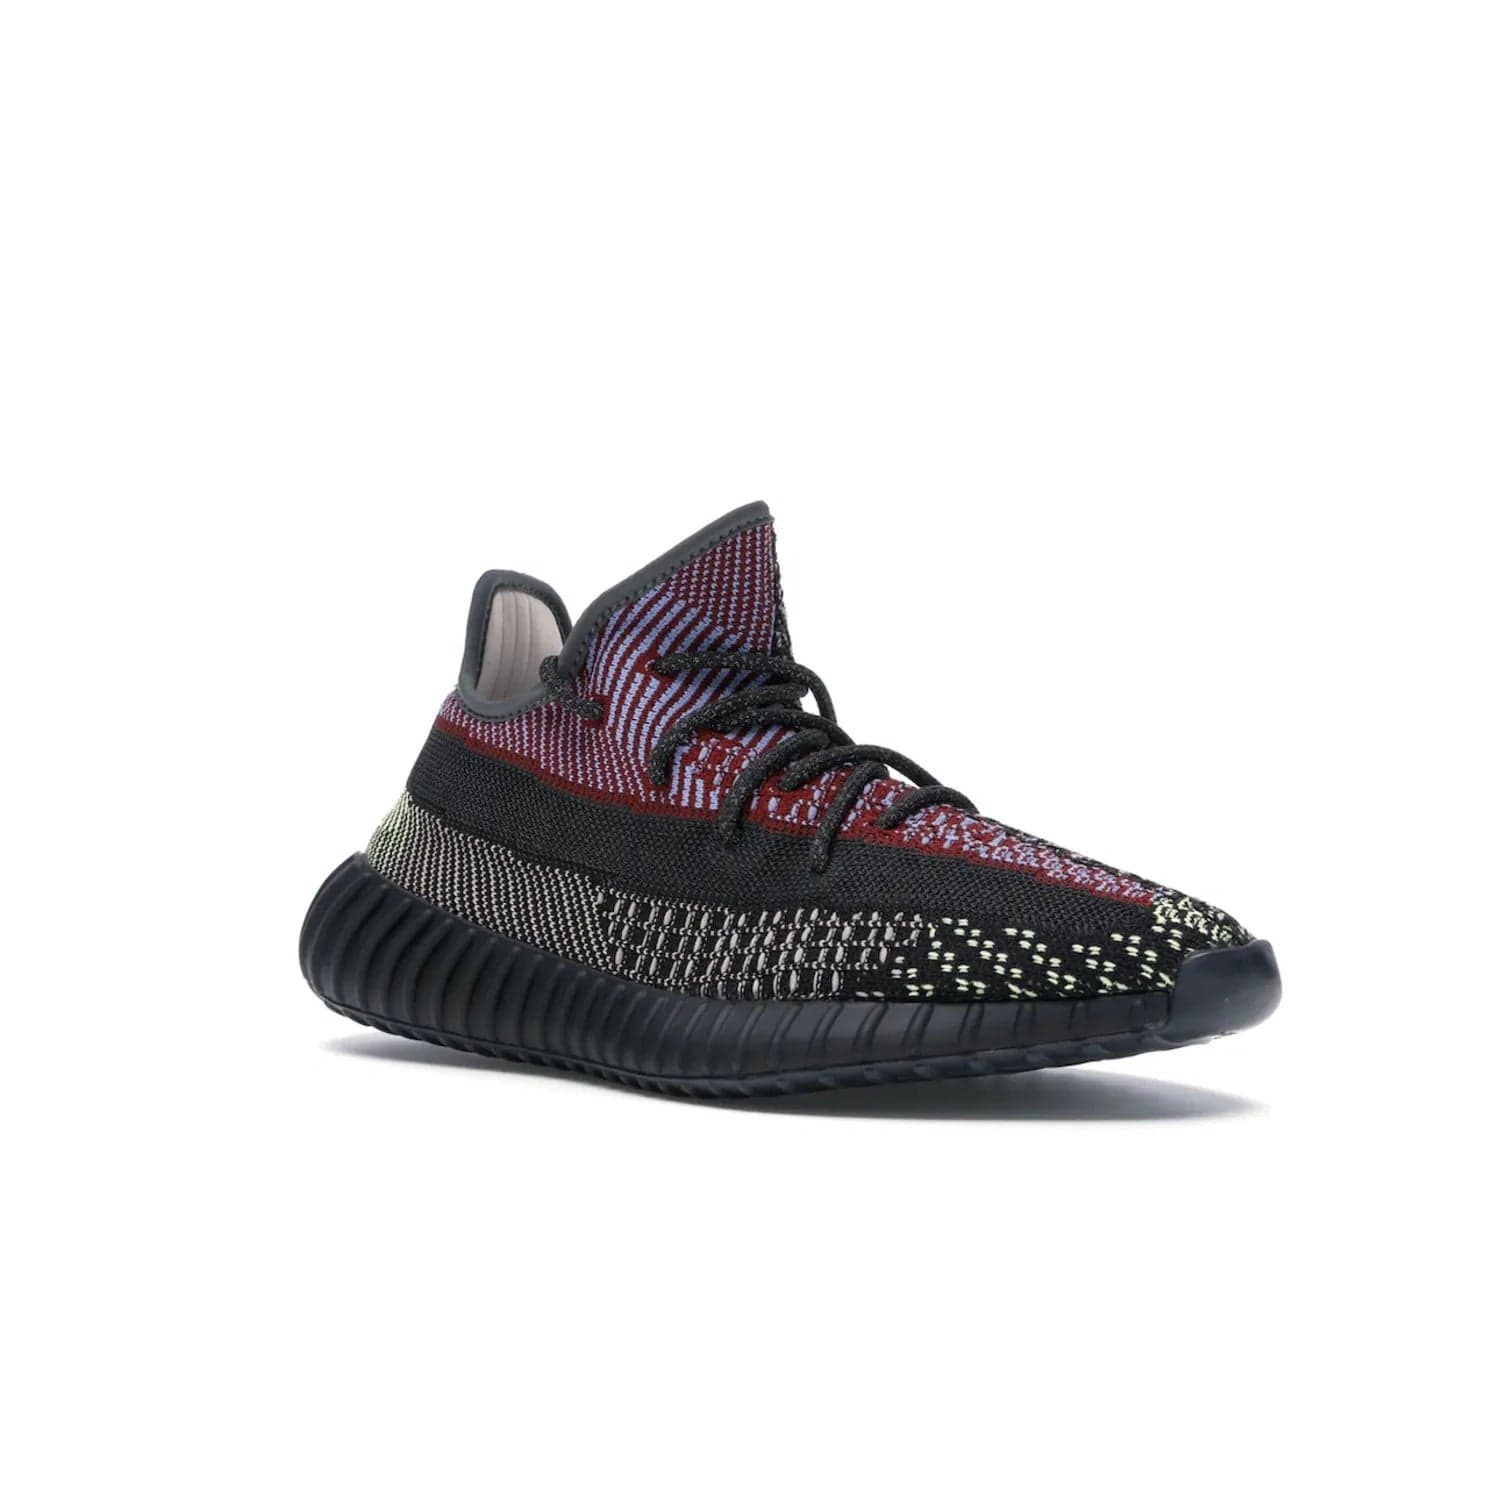 adidas Yeezy Boost 350 V2 Yecheil (Non-Reflective) - Image 5 - Only at www.BallersClubKickz.com - Make a statement with the eye-catching adidas Yeezy Boost 350 V2 Yecheil Non-Reflective. Featuring a spectrum of colorful hues, black upper, Boost cushioning, and black side stripe, the sneaker brings a luxe yet playful finish to any outfit.